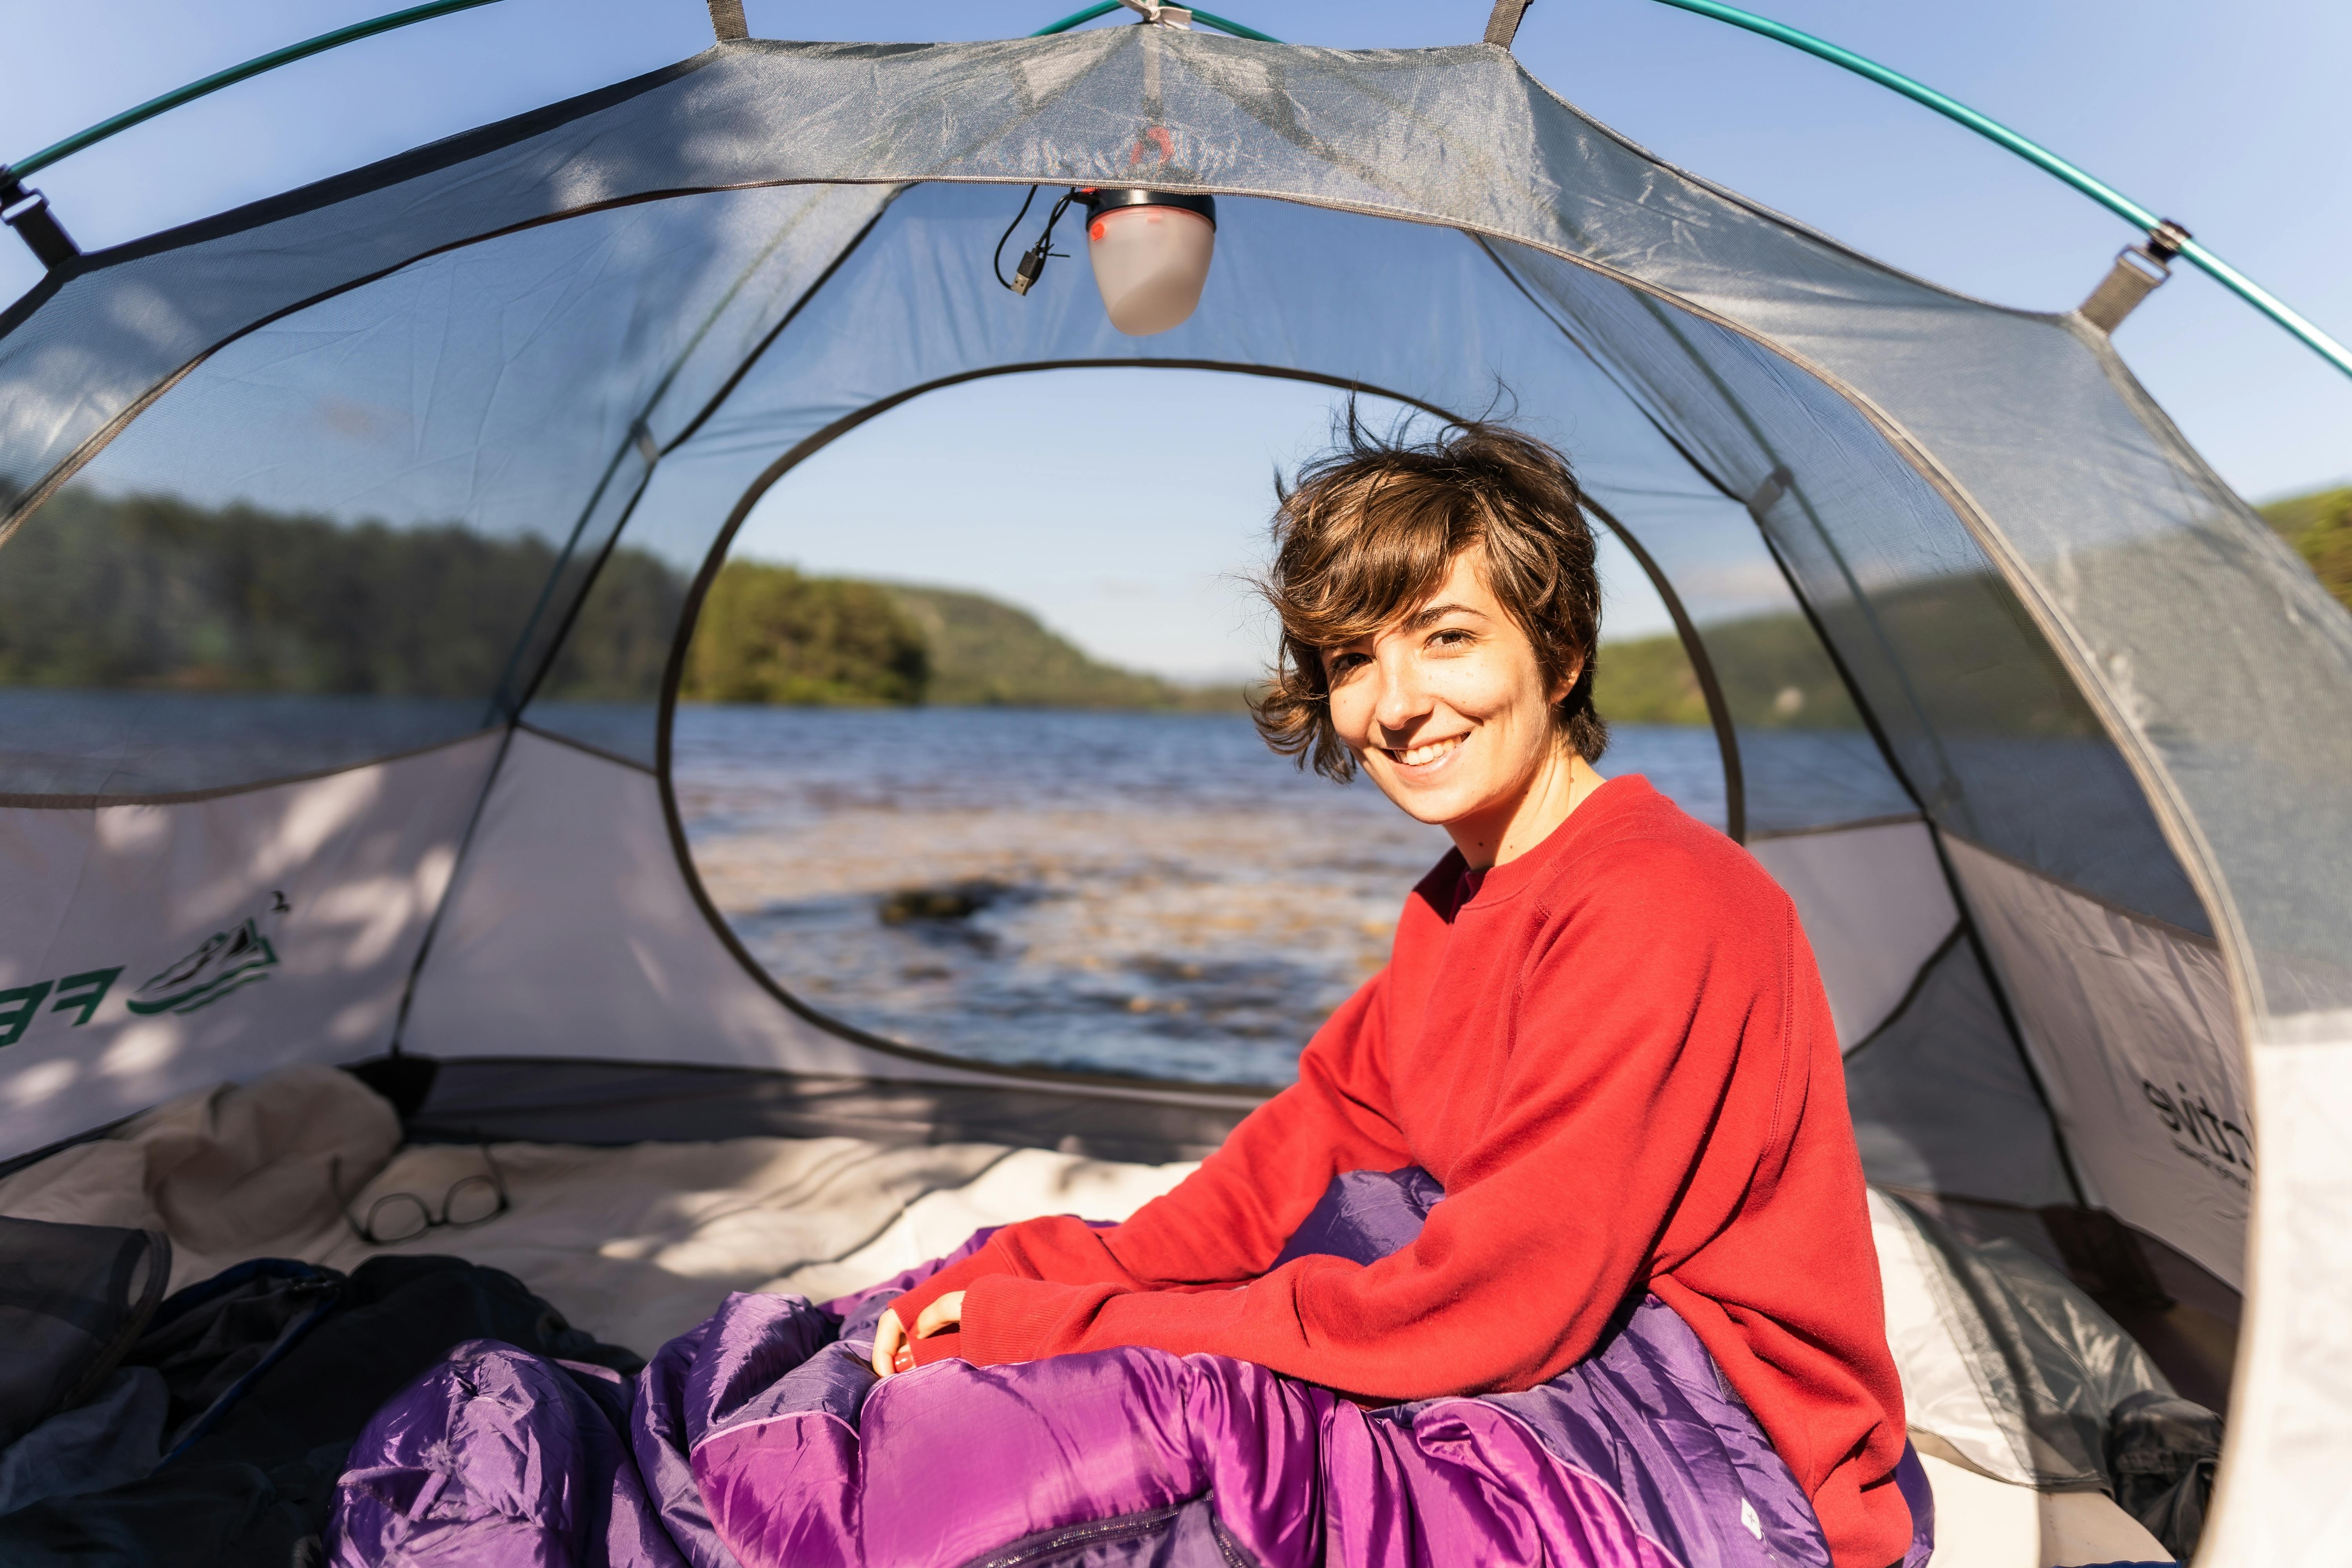 The Importance of Lighting Your Campsite - the Best Lighting Solutions